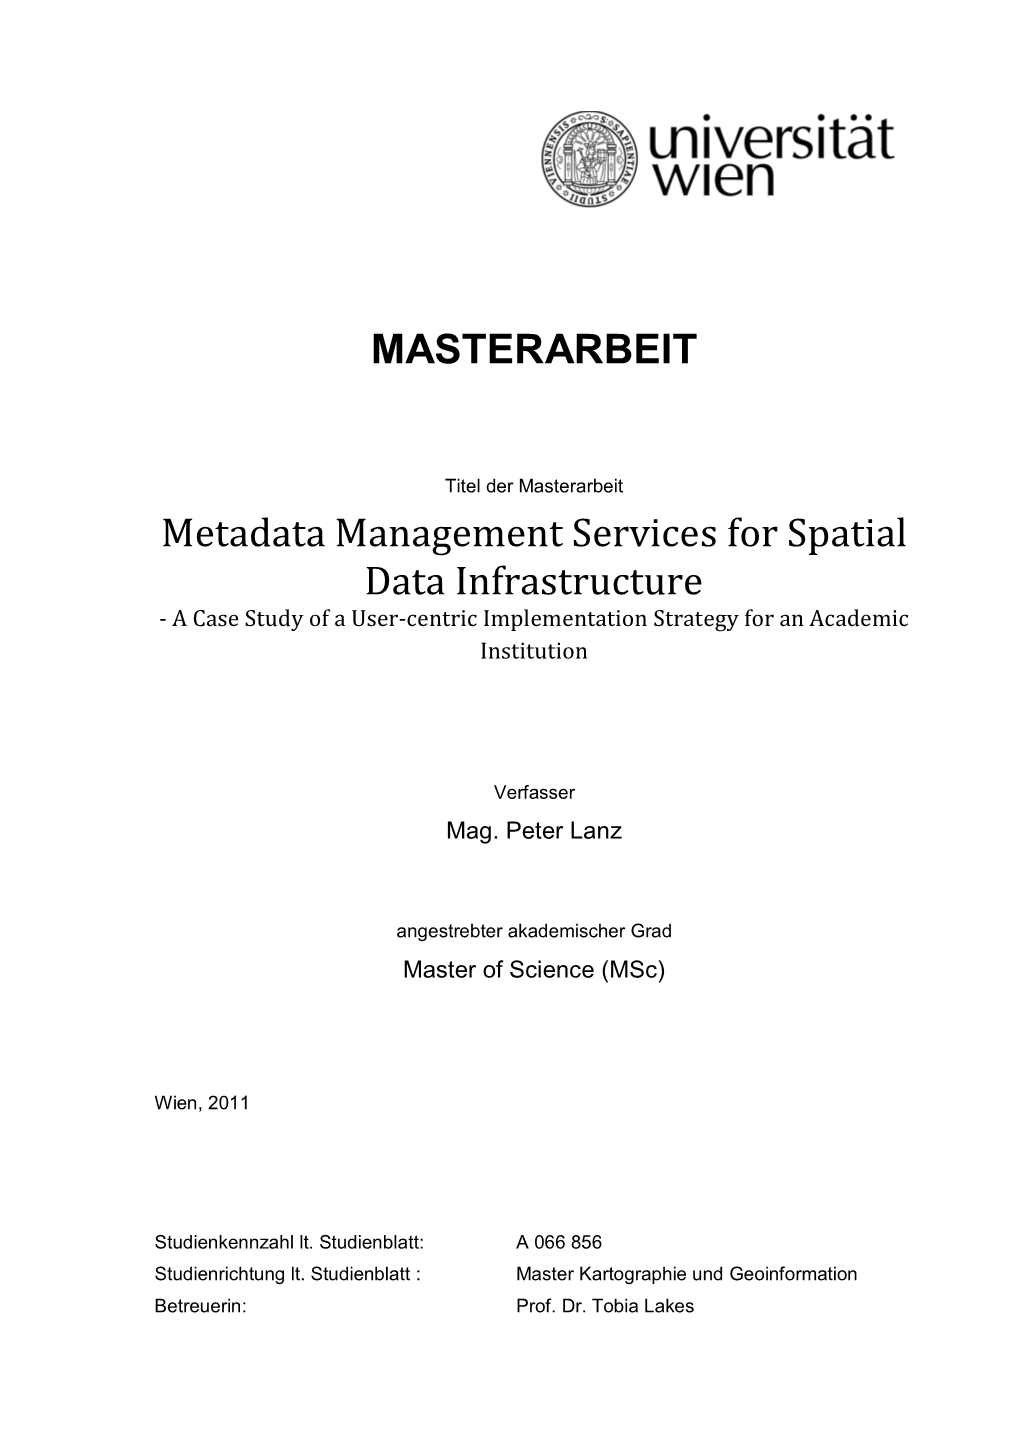 Metadata Management Services for Spatial Data Infrastructure - a Case Study of a User-Centric Implementation Strategy for an Academic Institution